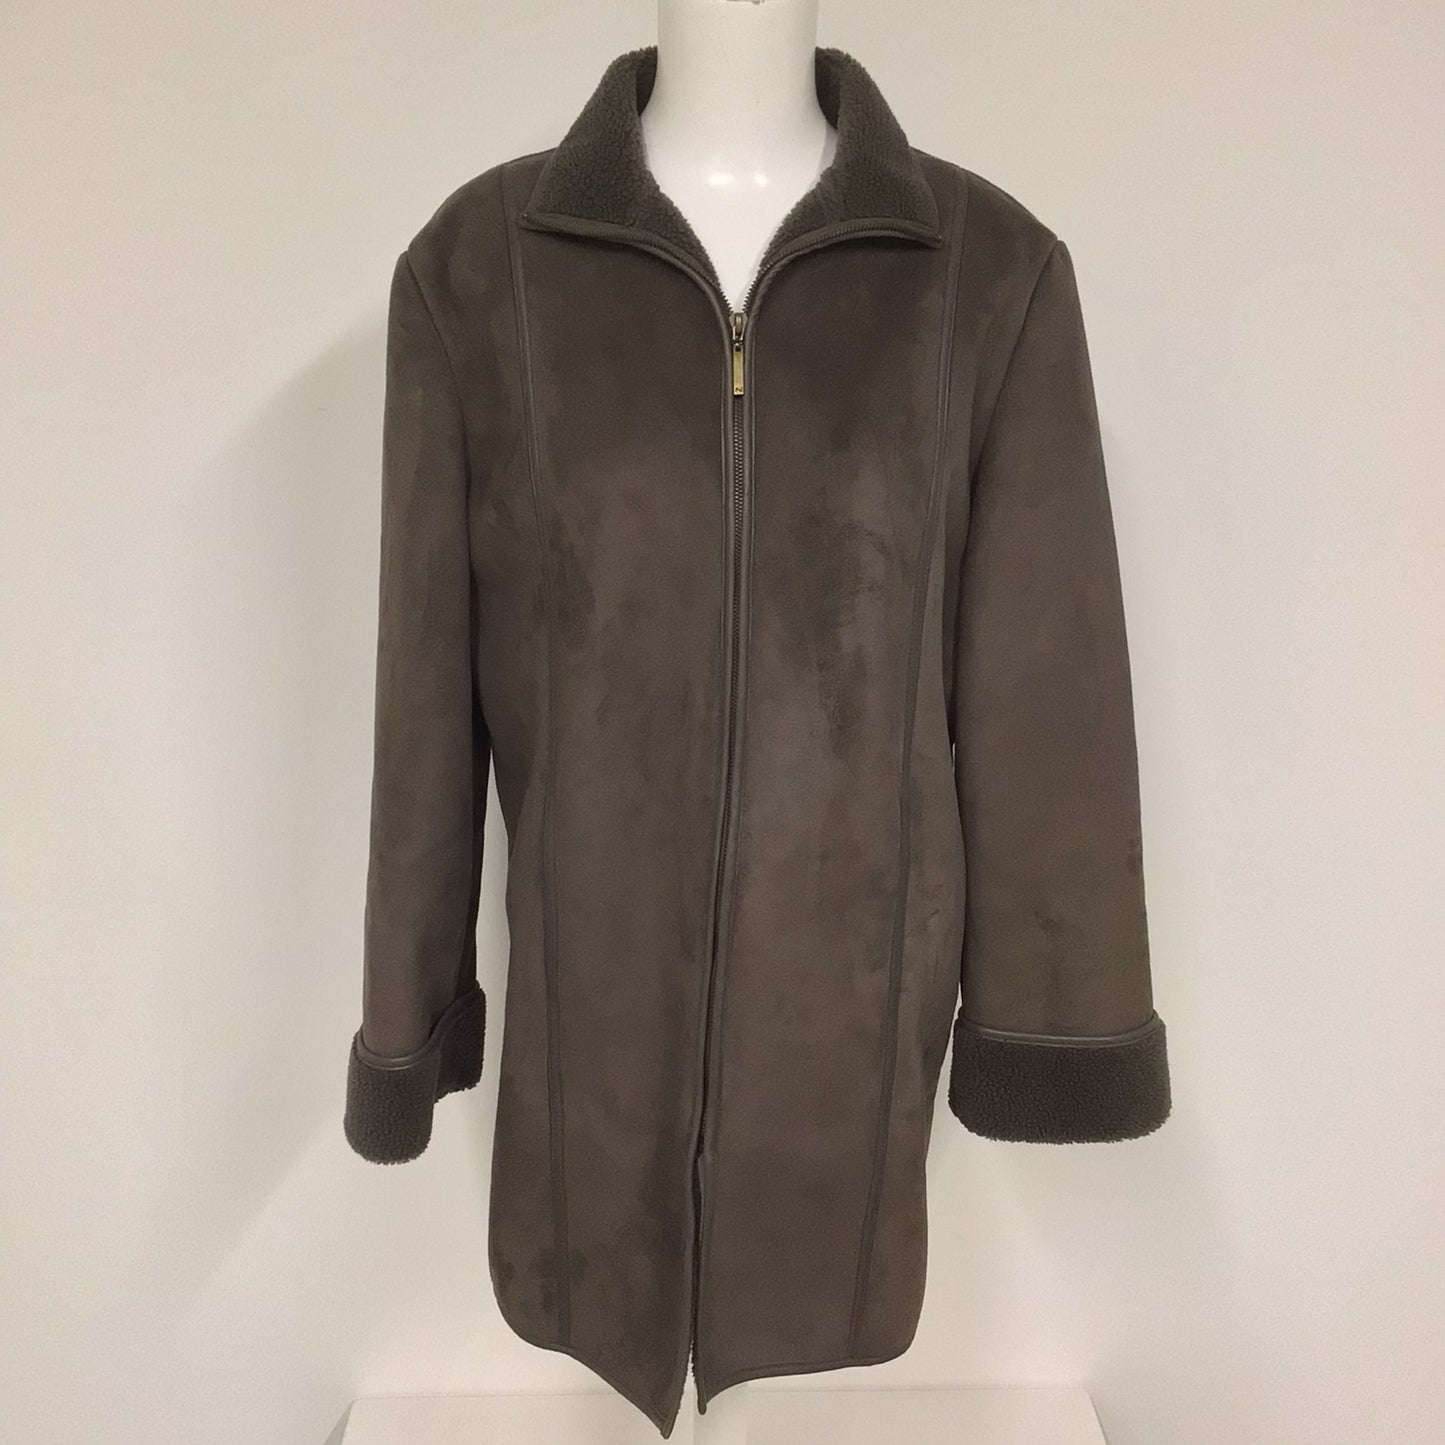 Next Chocolate Brown Faux Shearling Coat Size 14